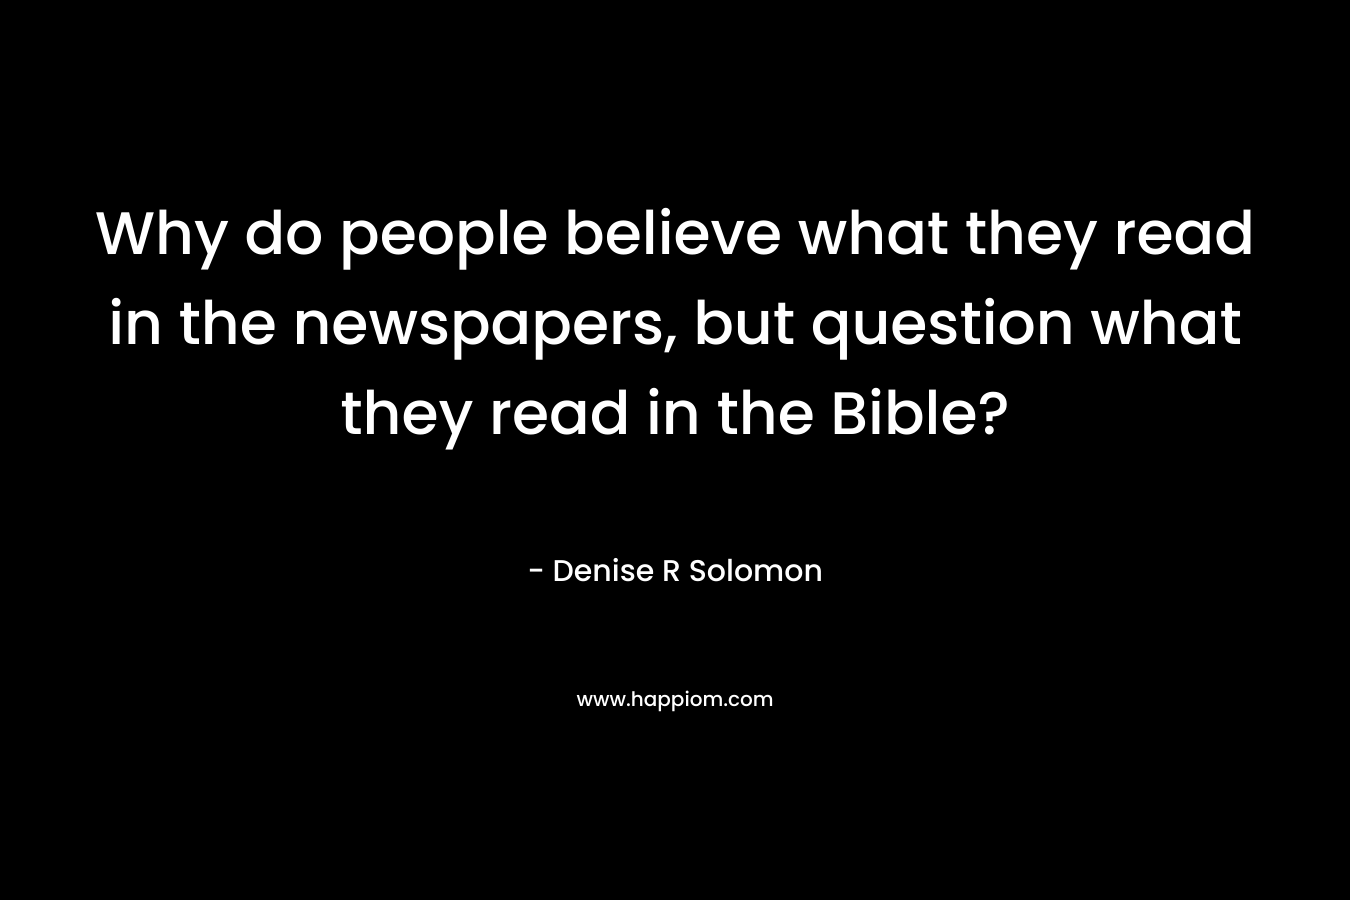 Why do people believe what they read in the newspapers, but question what they read in the Bible? – Denise R Solomon